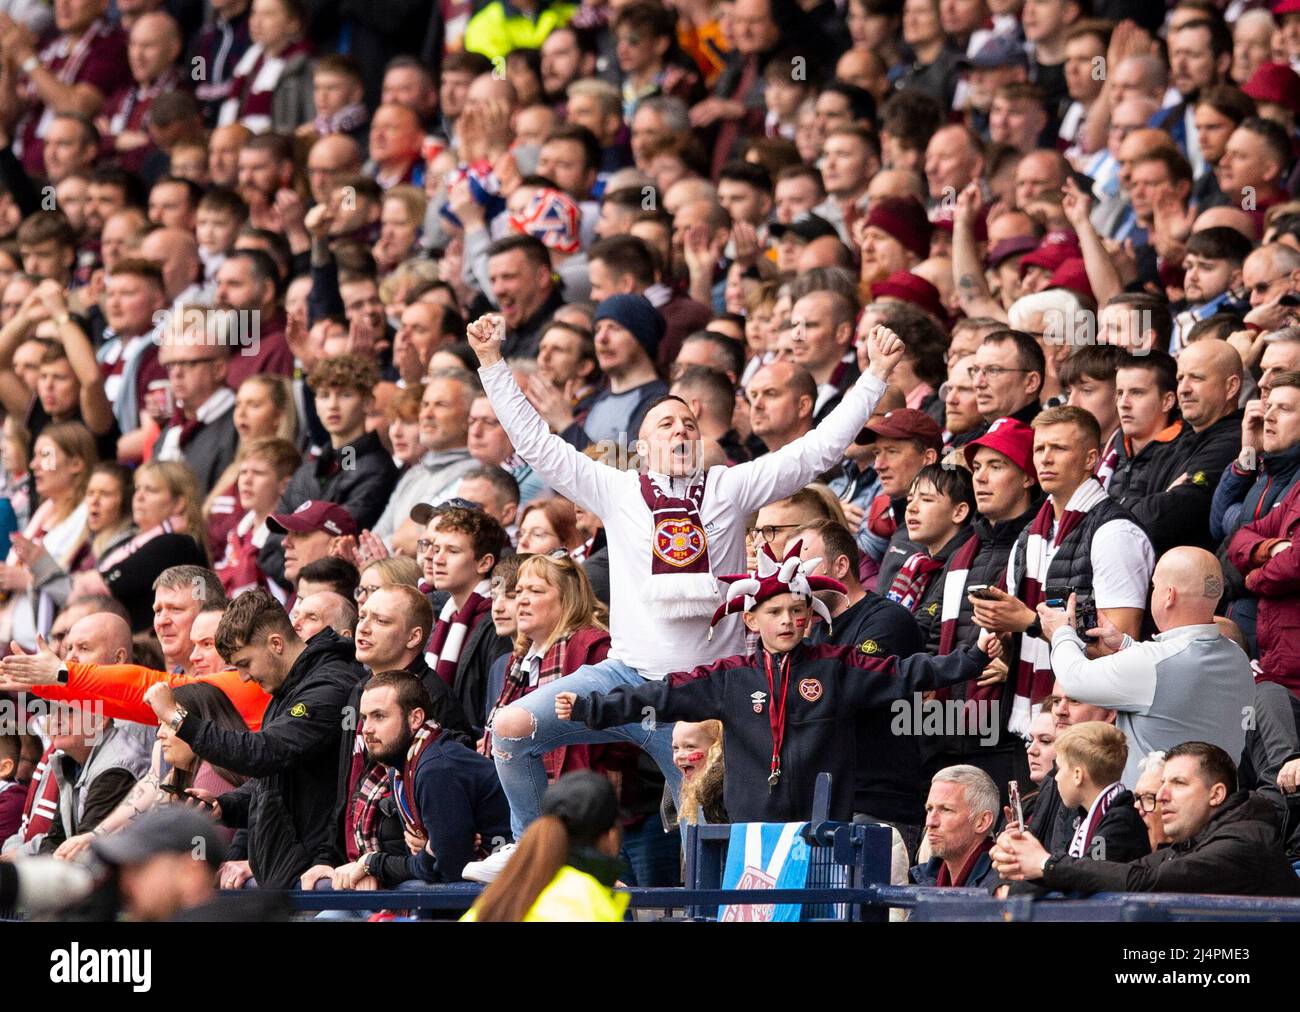 Glasgow, UK. 07th Apr, 2022. Scottish Cup semi final - Heart of Midlothian FC v Hibernian FC 07/04/2022 Pic shows: Hearts supporters sense victory as Hearts take on Hibs in the Scottish Cup semi final at Hampden Park, Glasgow Credit: Ian Jacobs/Alamy Live News Stock Photo